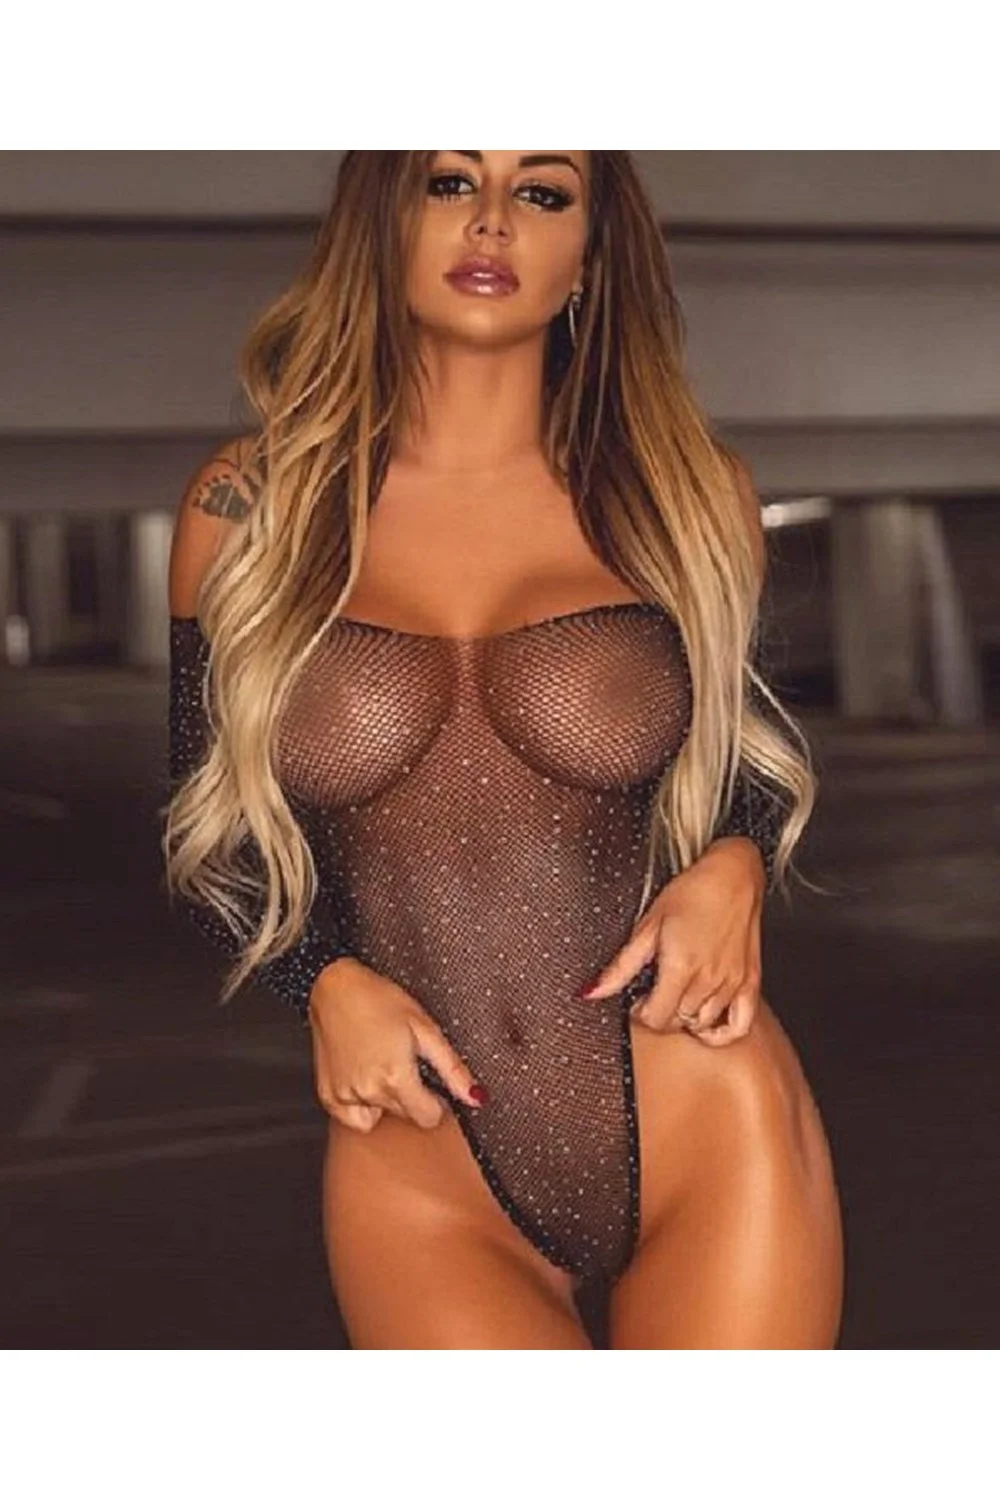 Wongn Sexy Latex Leather Bodysuit Women Lingerie One-piece Body Sex Costume Bandage Rompers Backless Sexy Underwear Teddies 320-1